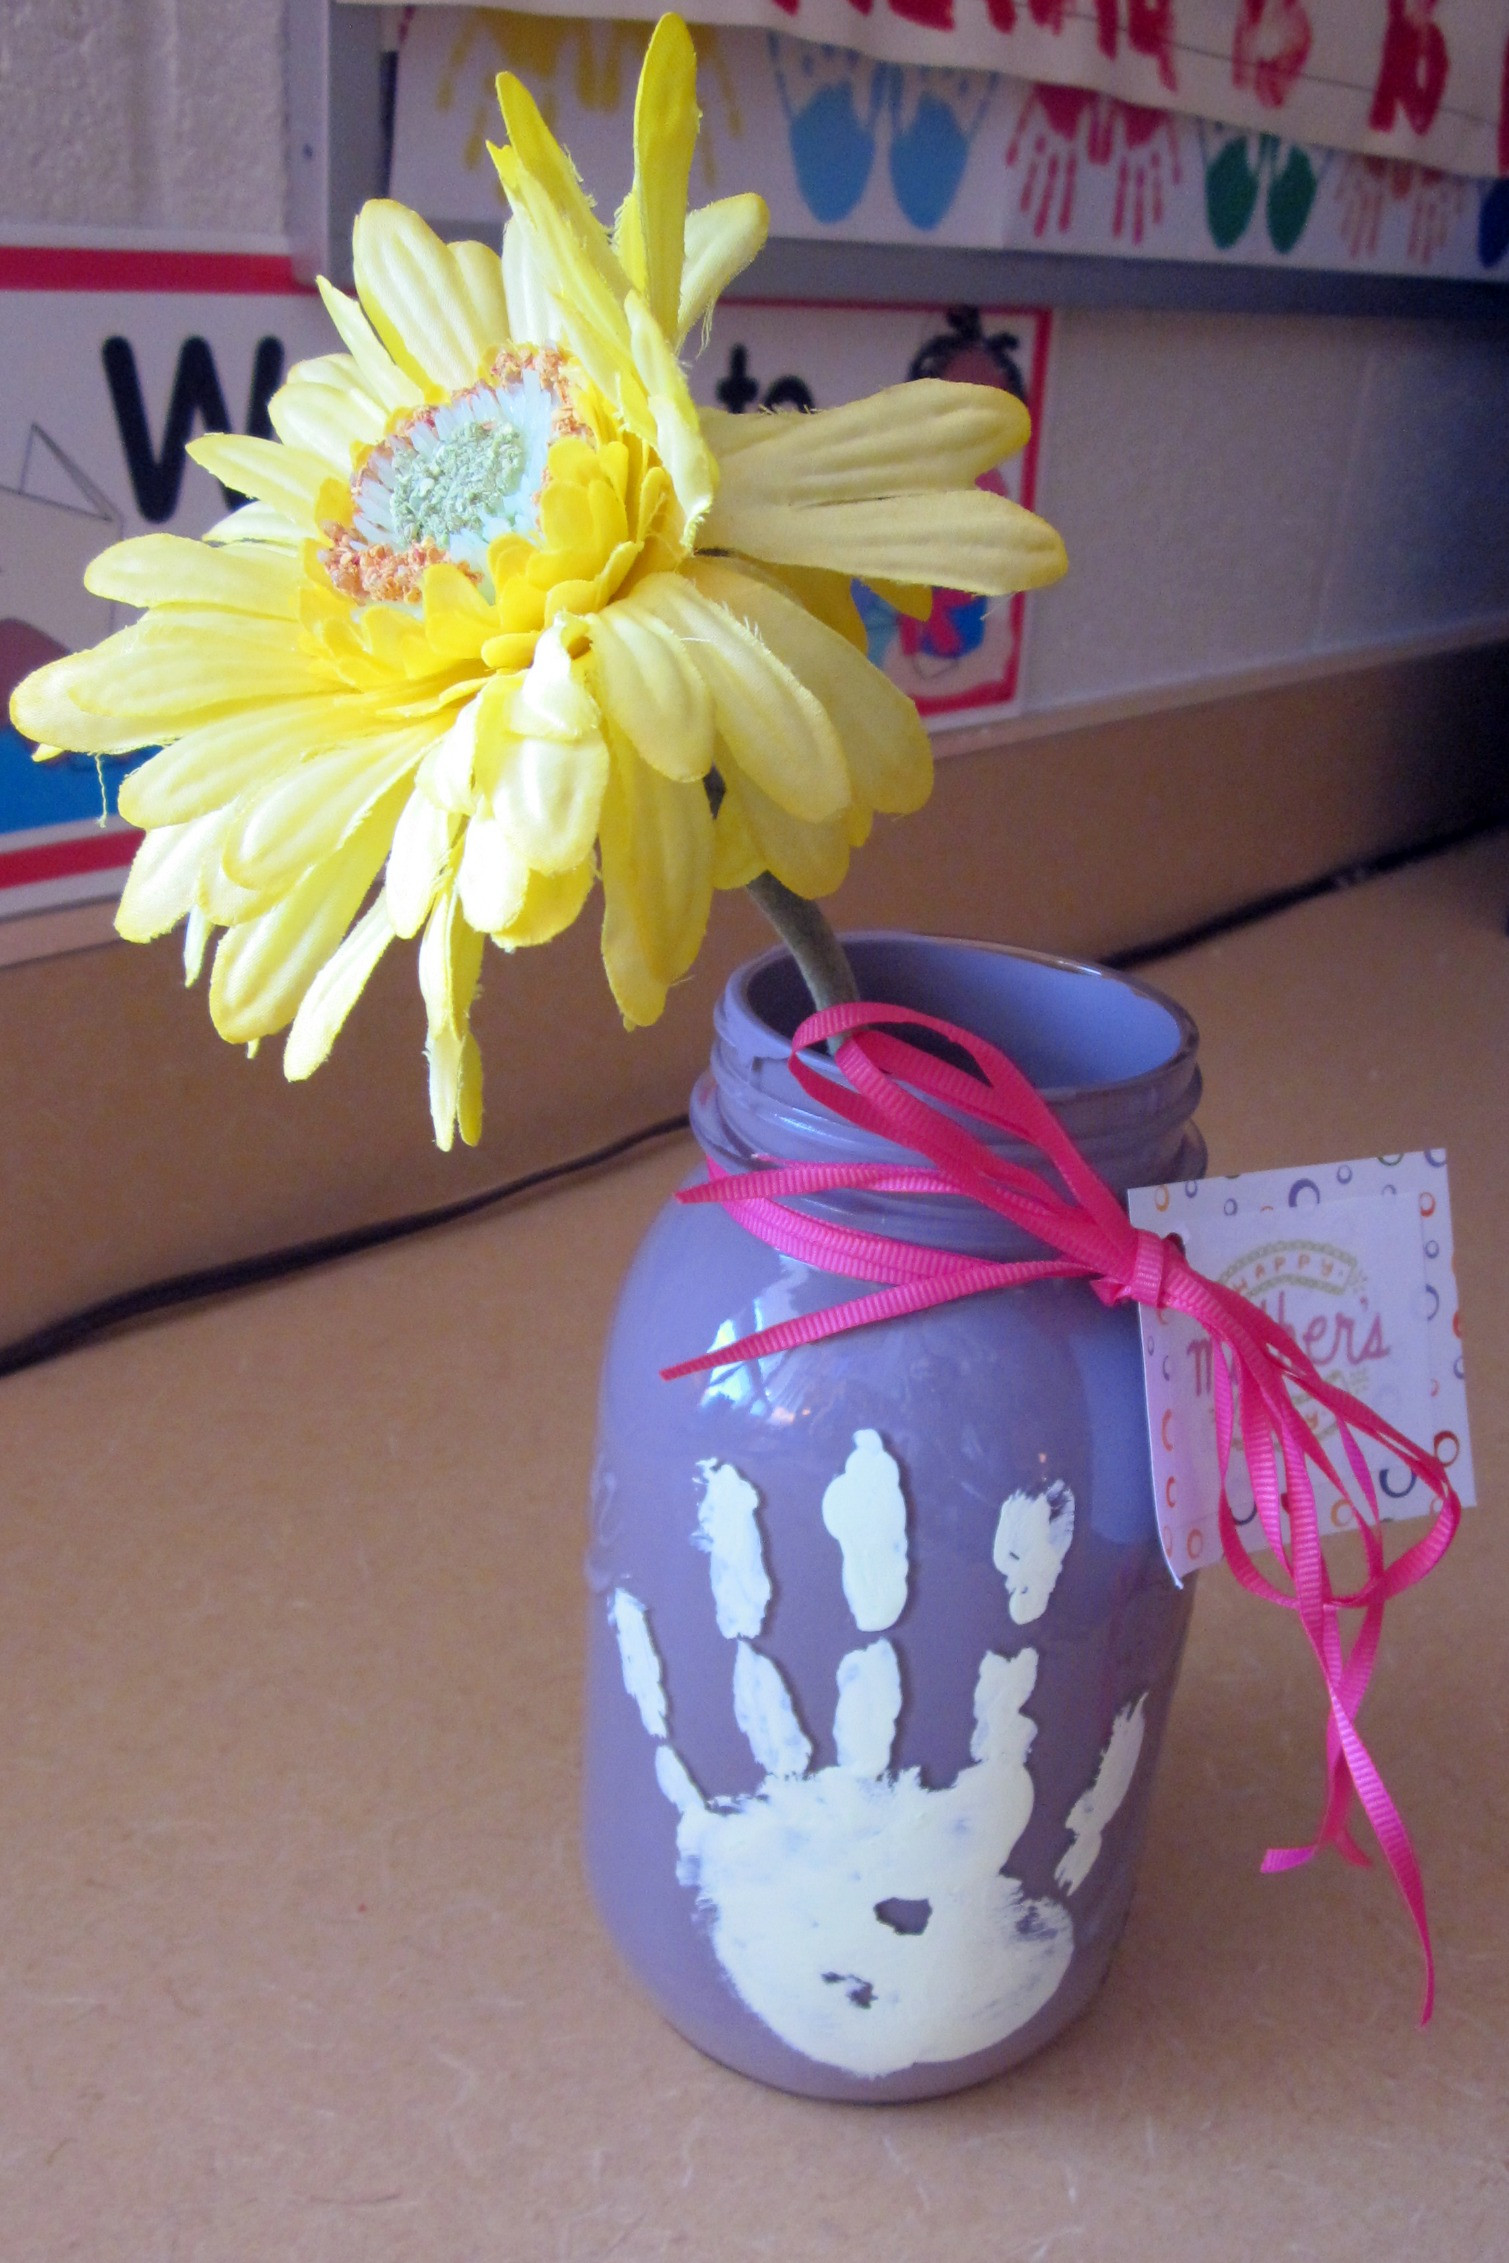 Mothers Day Kids Craft
 Mothers Day Ideas for kids mason jar vase